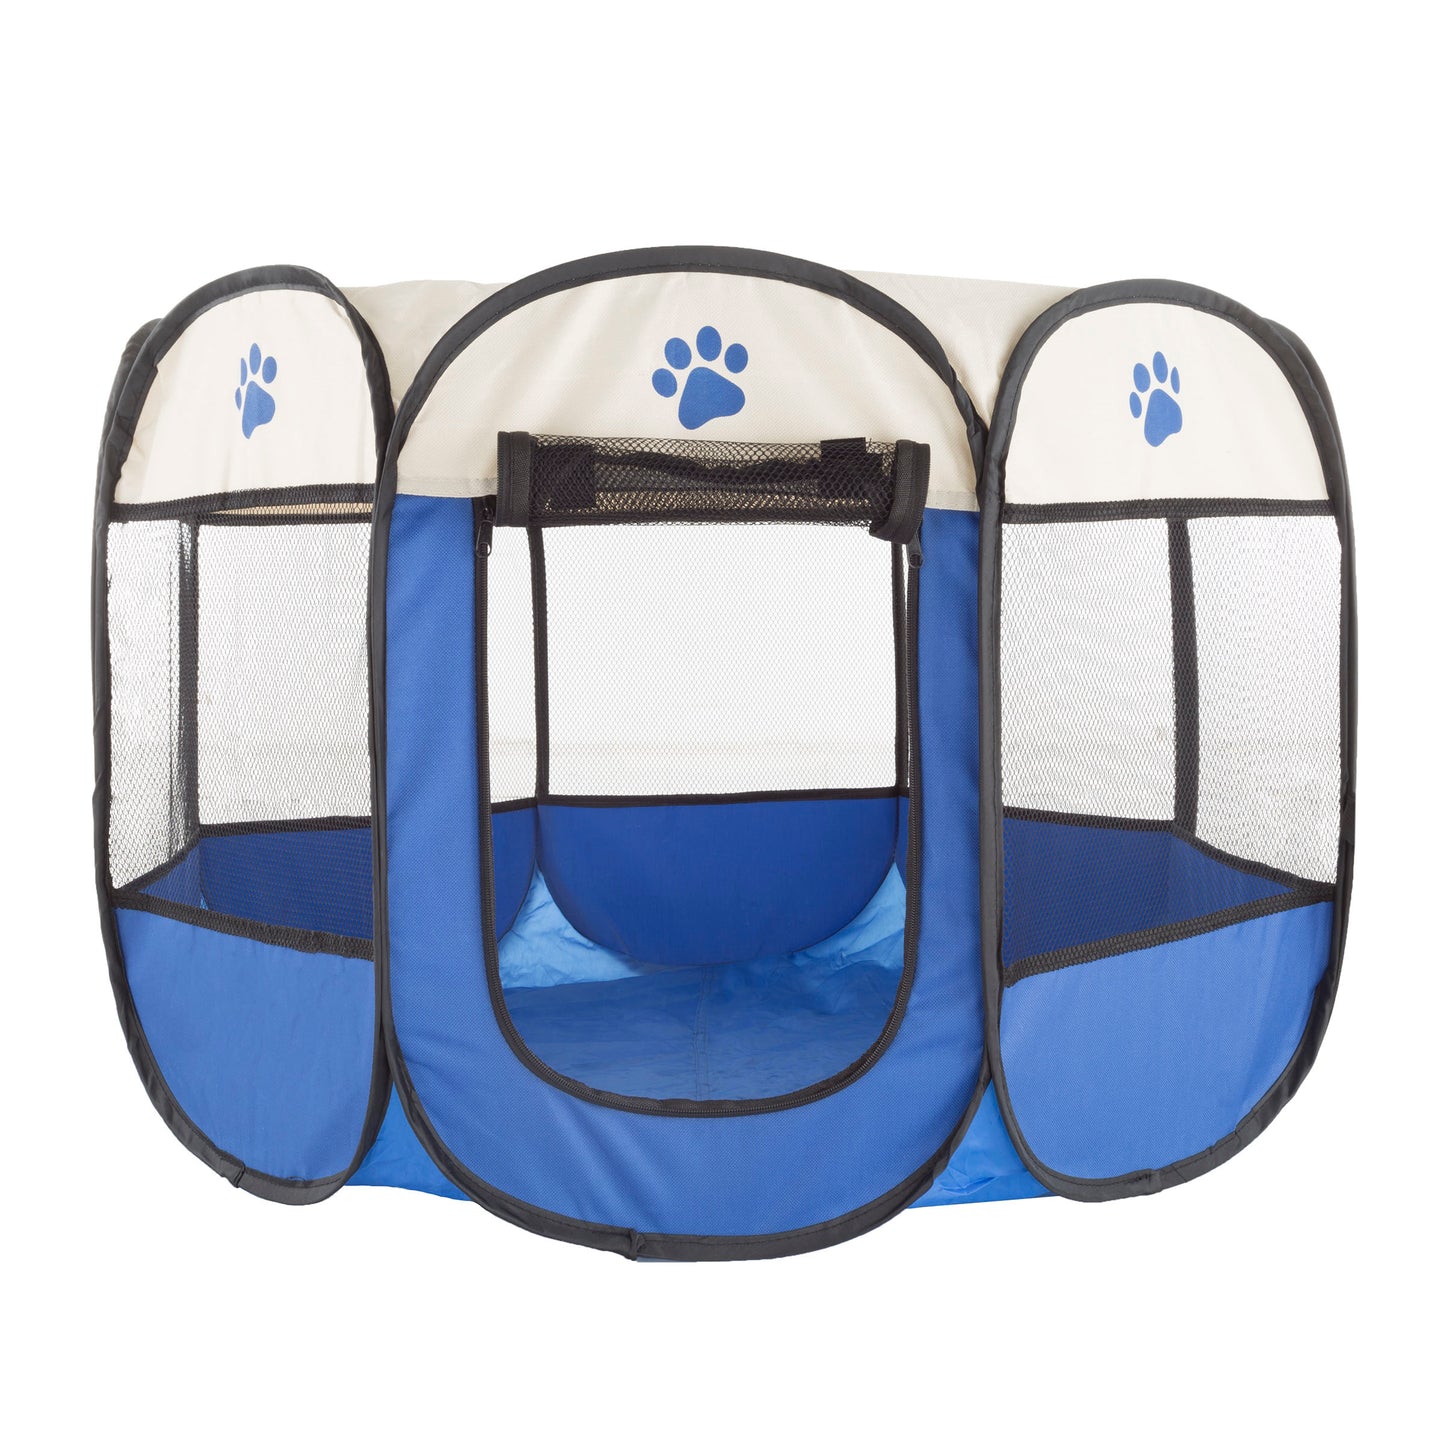 Portable Pop-Up Cat with Dog Playpen